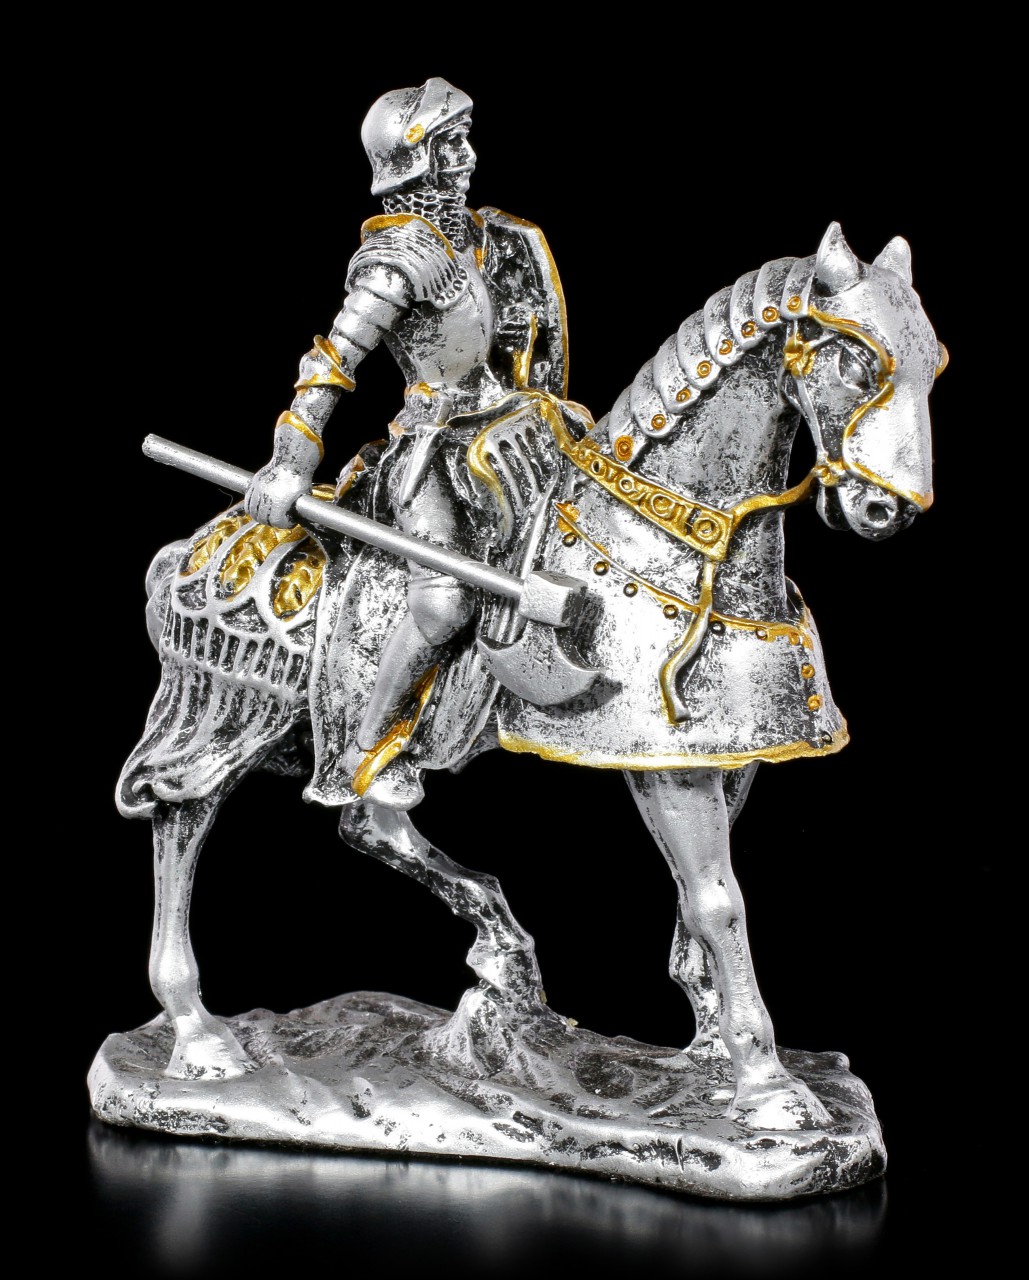 Small Knight Figurine on Horse with Axe